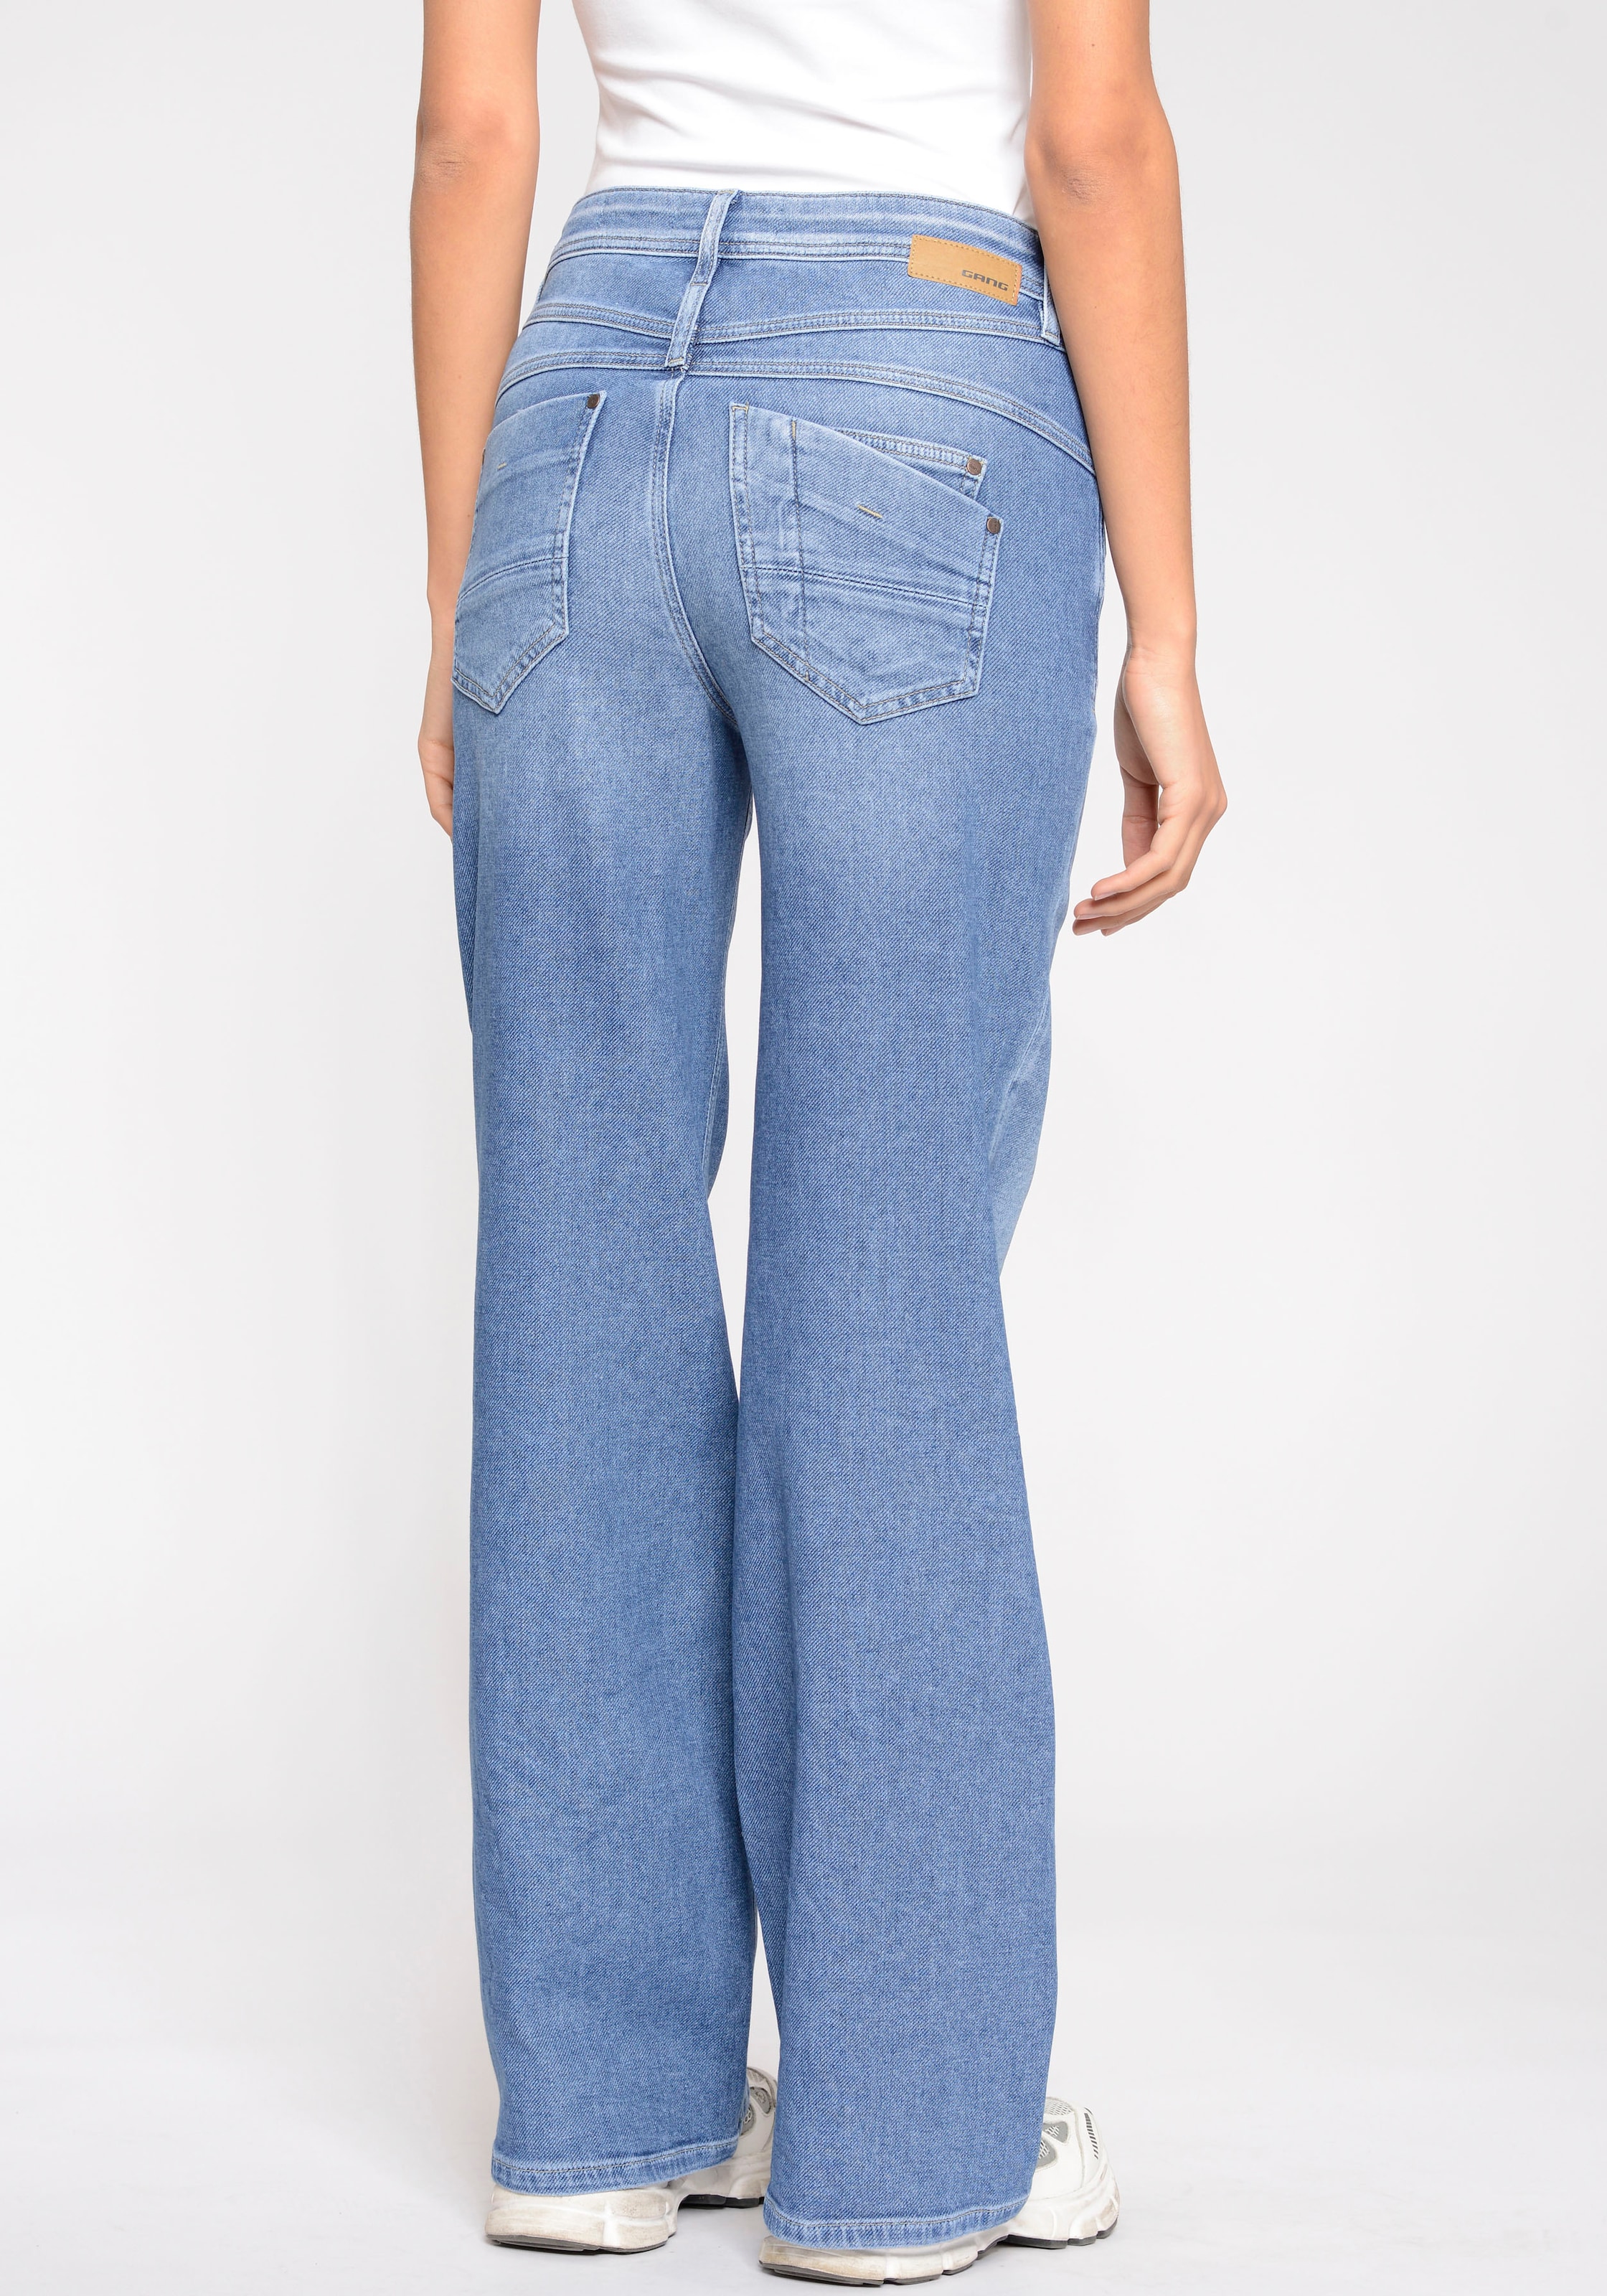 ♕ bei Wide« »94Amelie Jeans GANG Weite